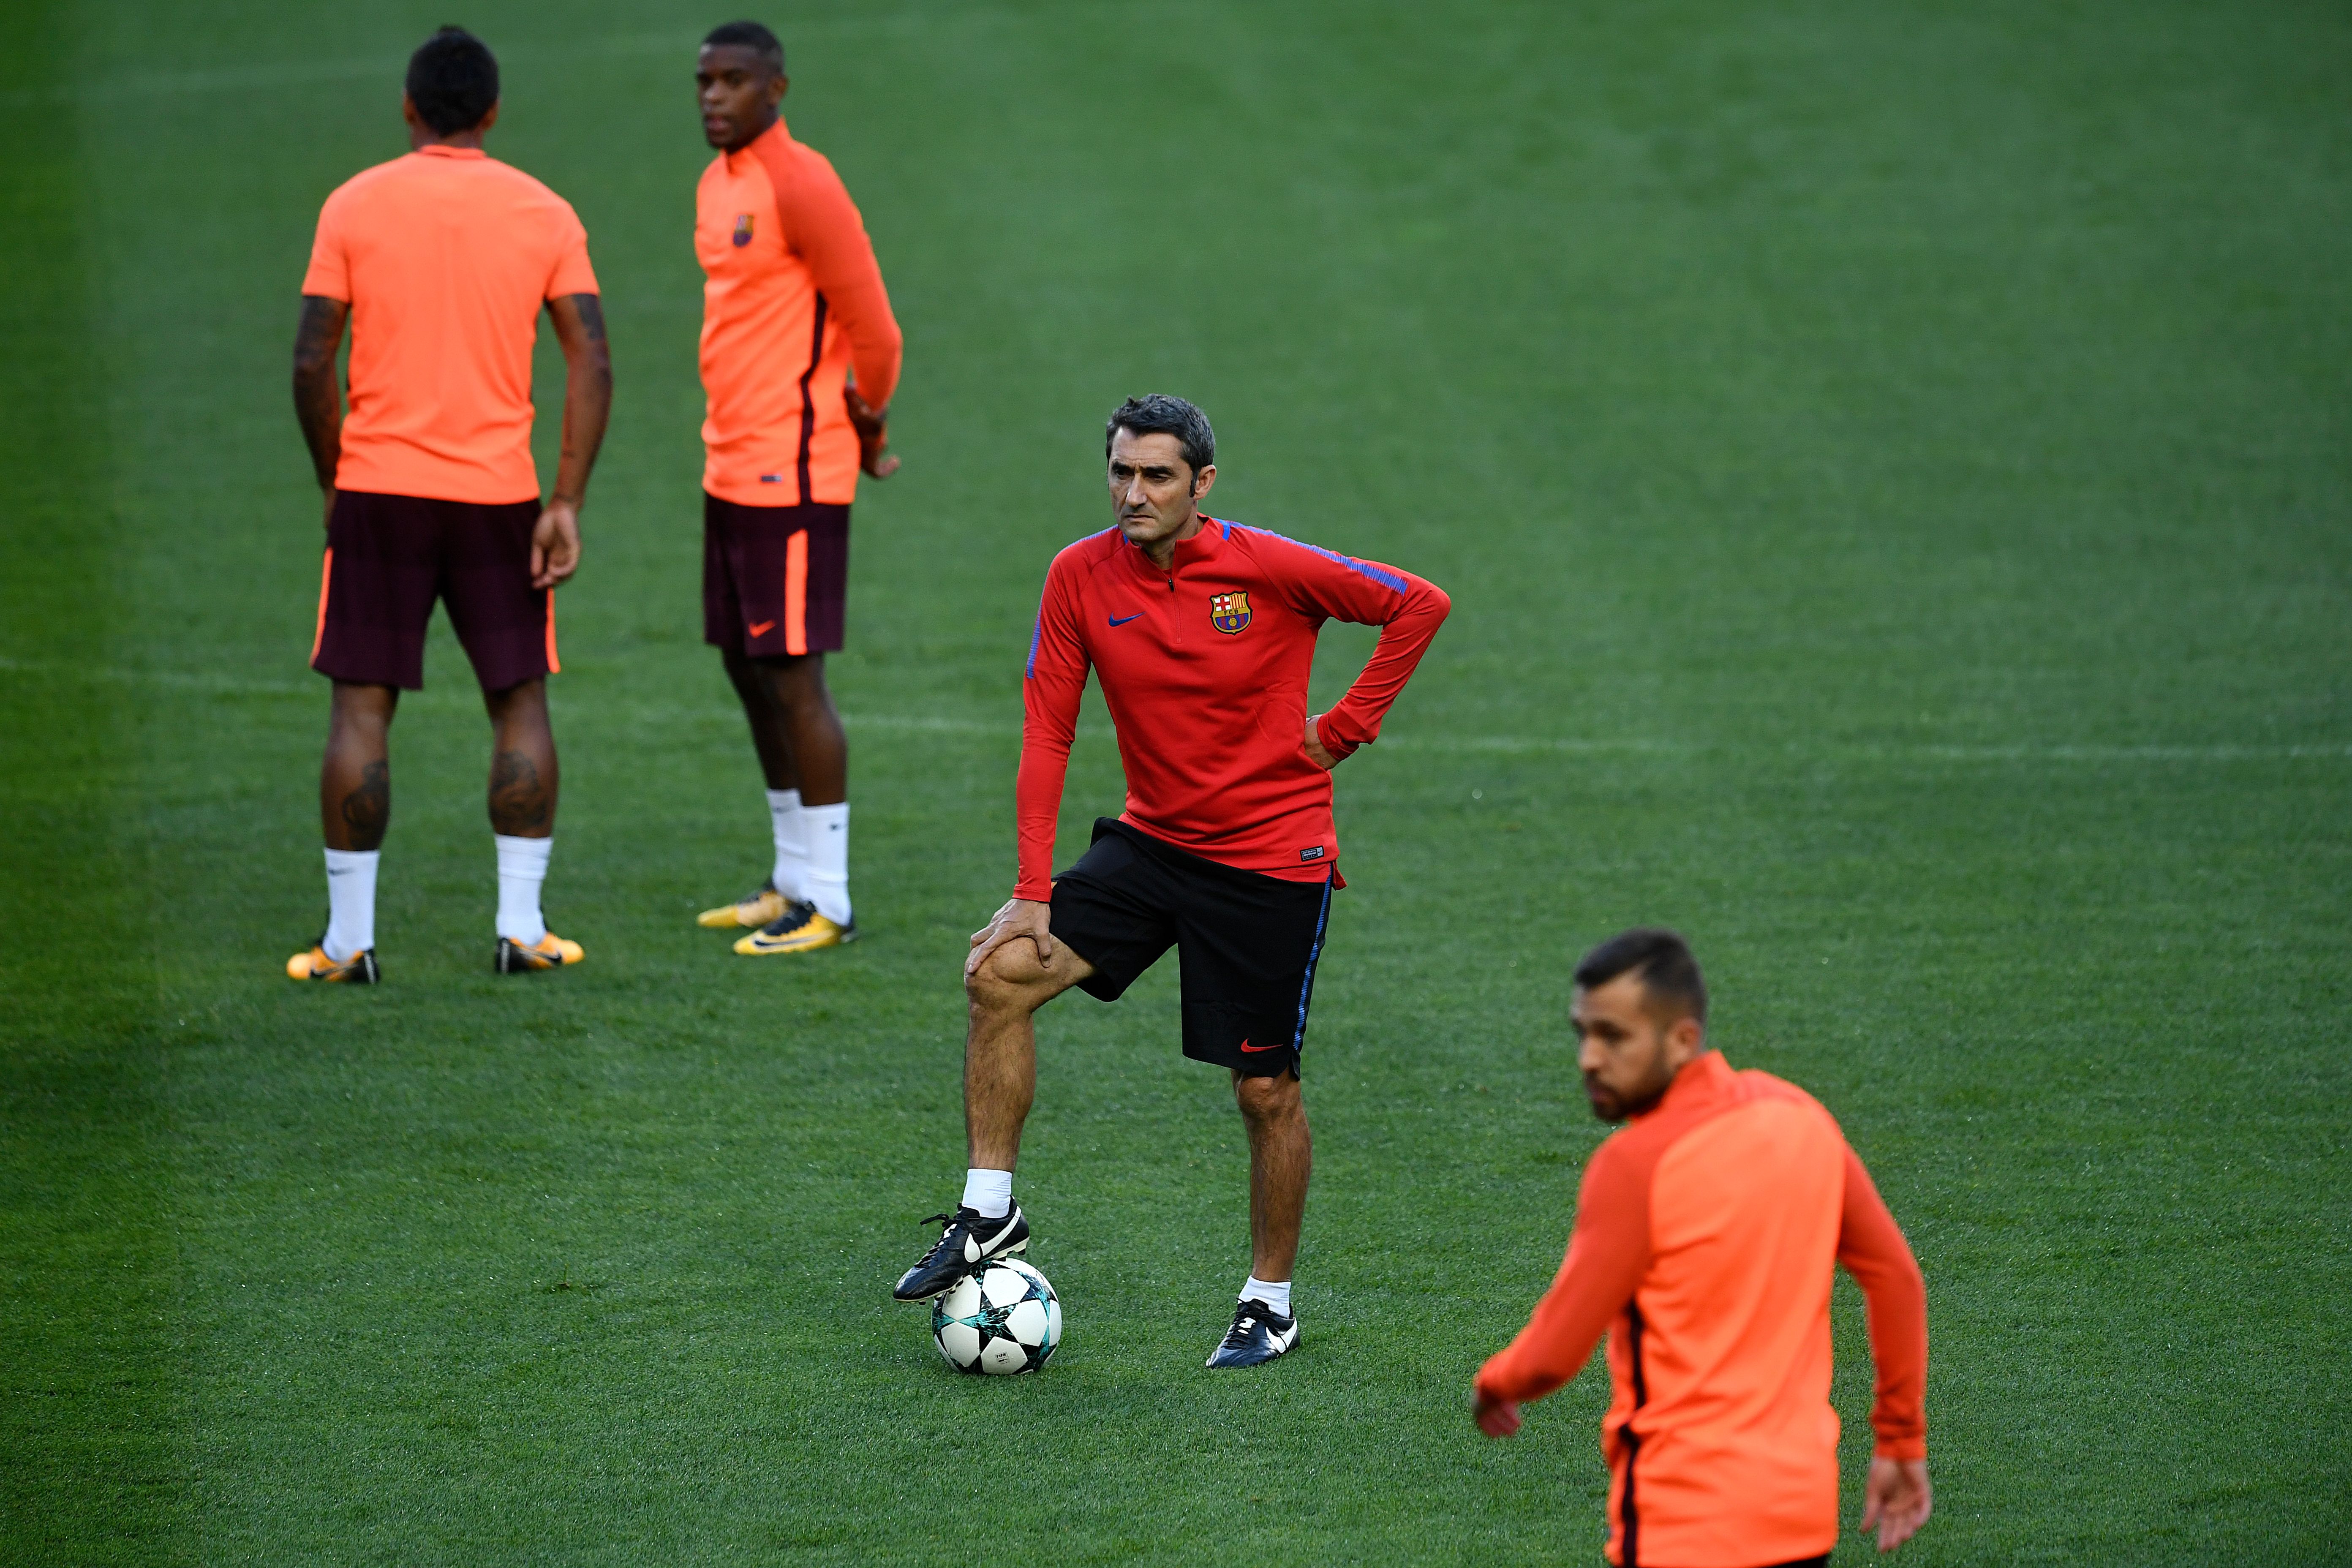 Barcelona's coach Ernesto Valverde stands on the pitch during a training session at Alvalade XXI stadium in Lisbon on September 26, 2017, on the eve of the UEFA Champions League football match Sporting vs Barcelona. / AFP PHOTO / FRANCISCO LEONG        (Photo credit should read FRANCISCO LEONG/AFP/Getty Images)